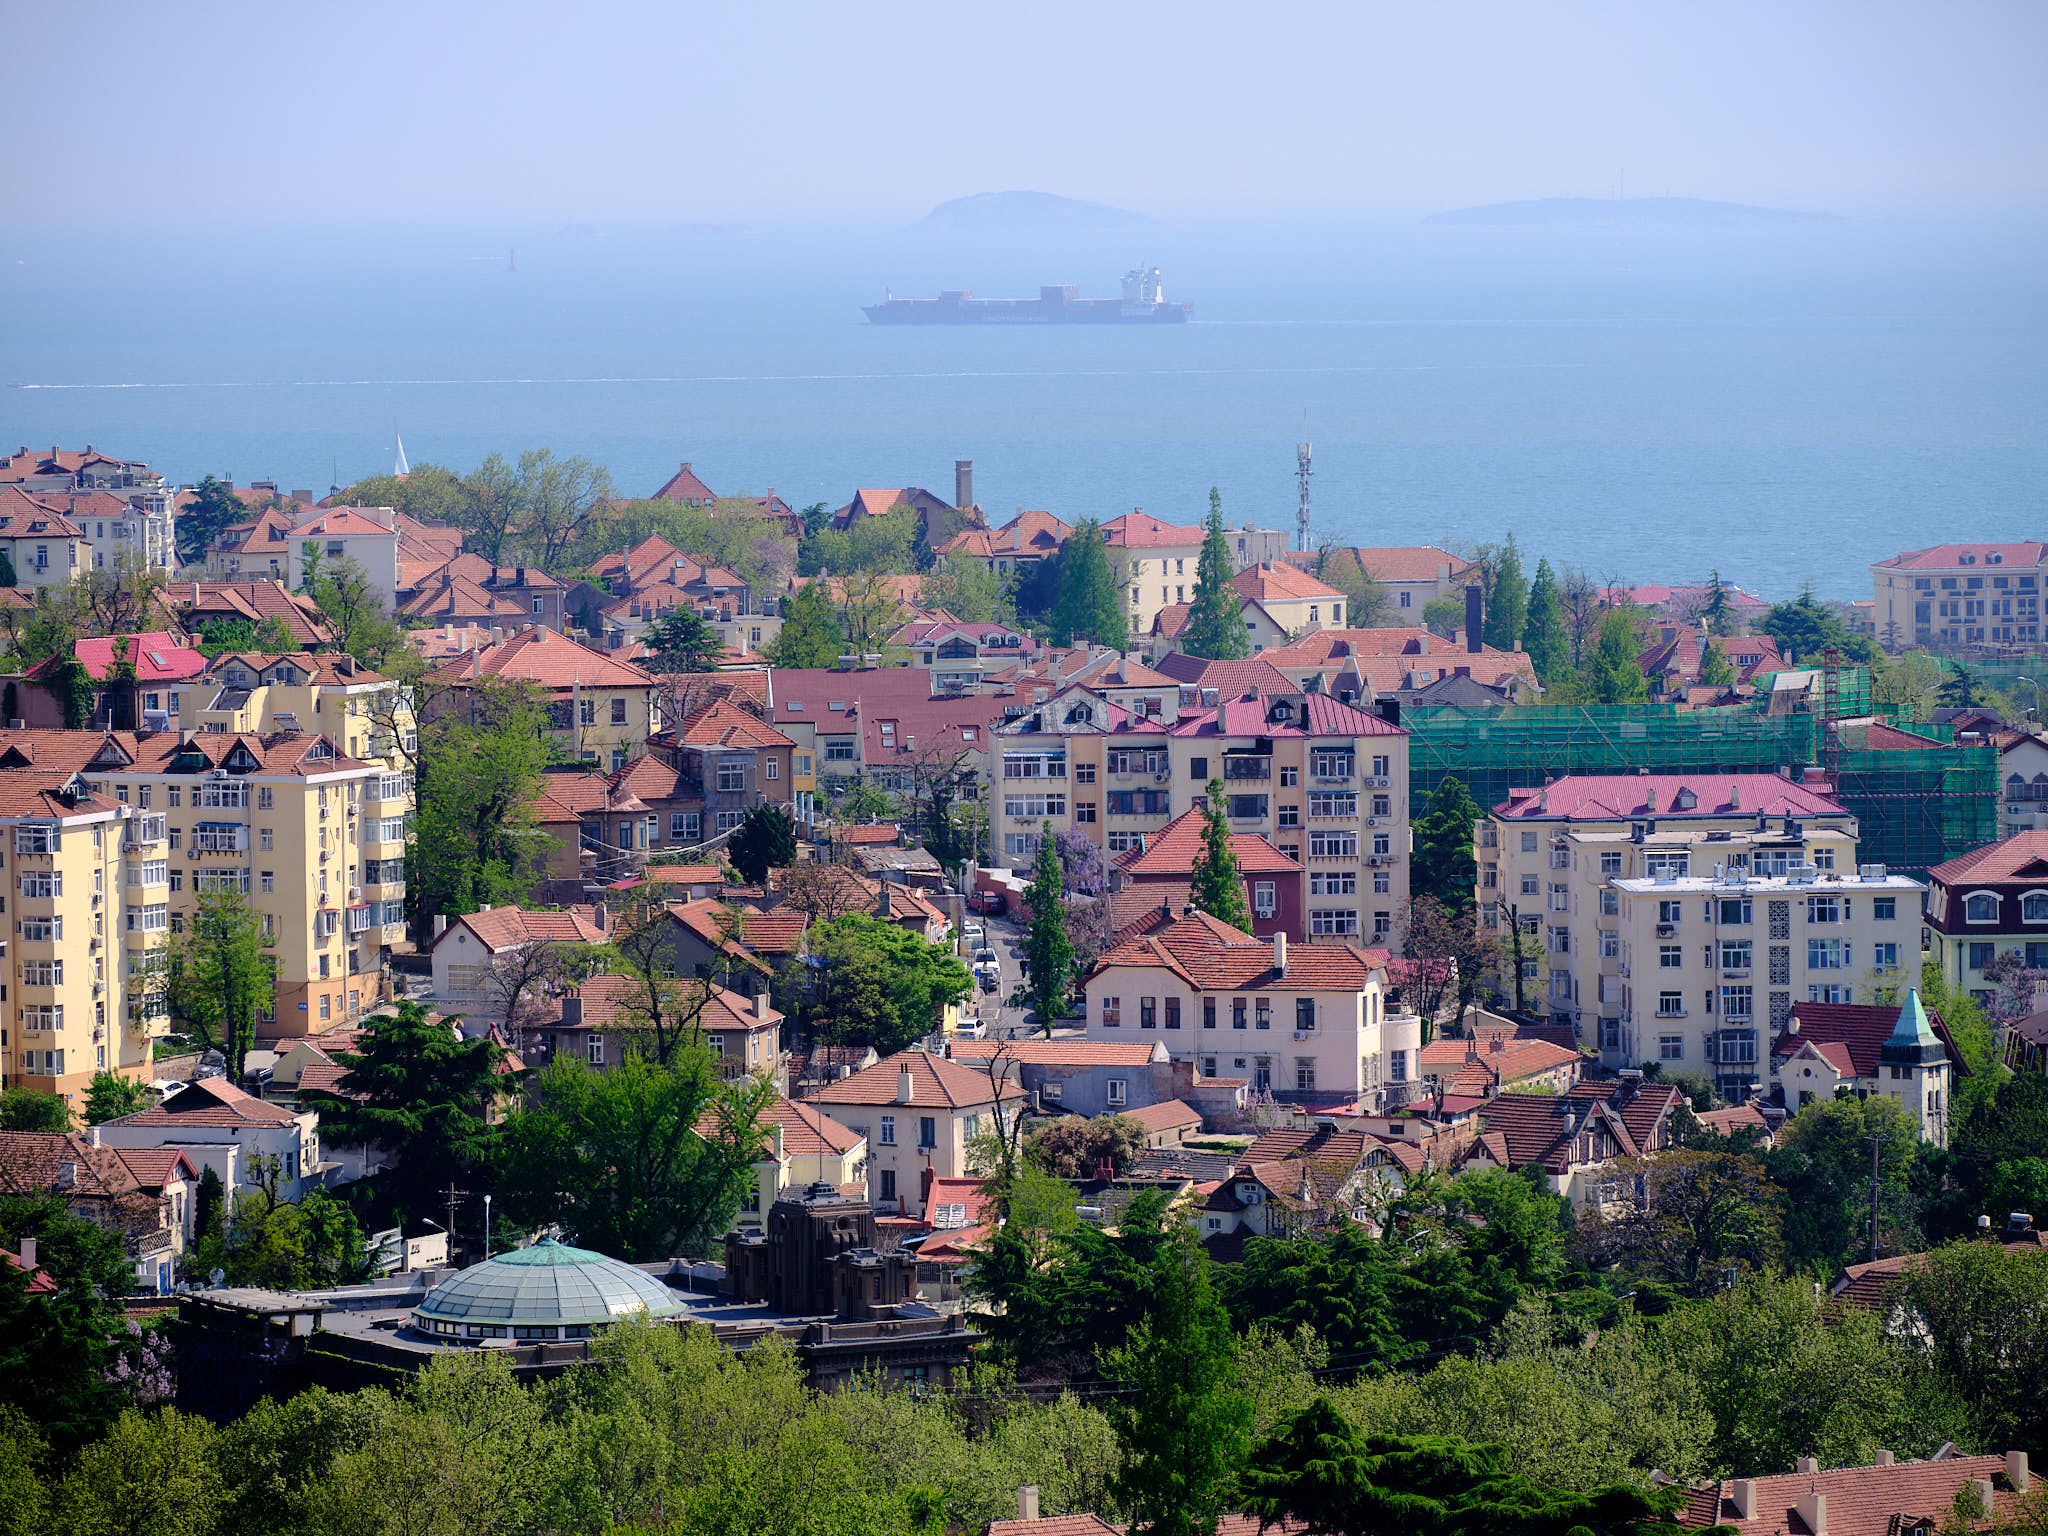 View of German architecture from Signal Hill in Qingdao